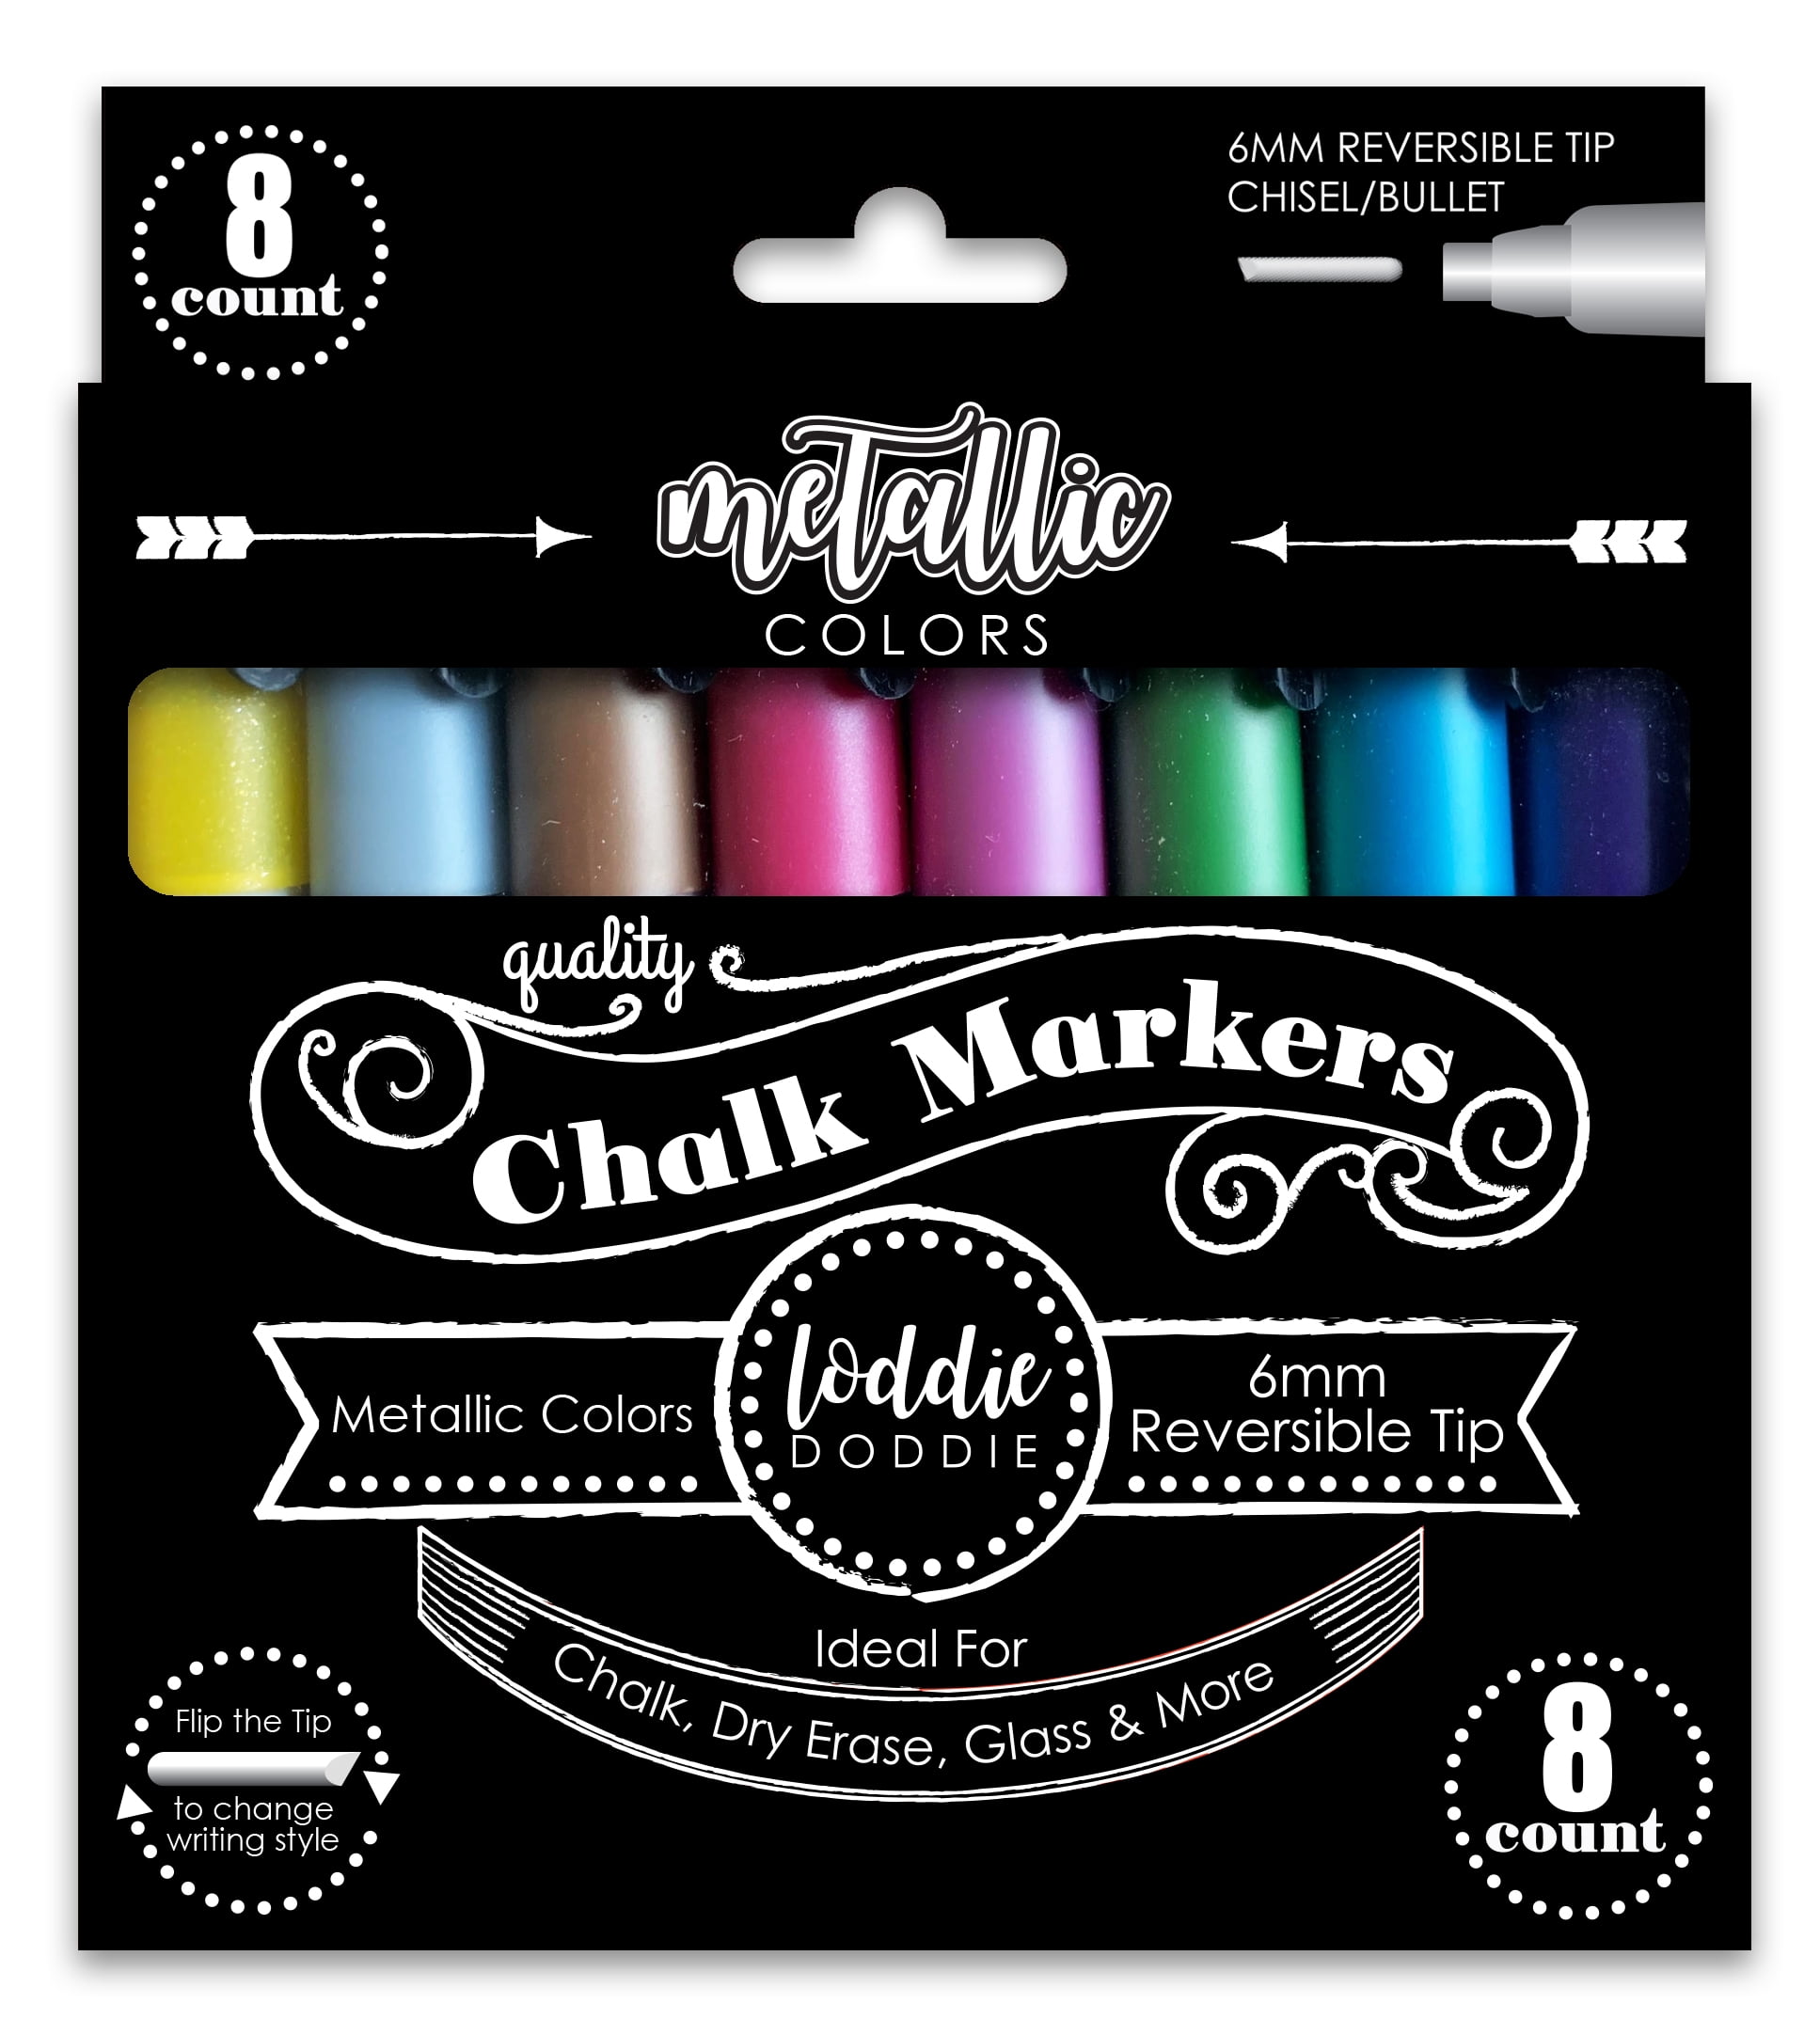 Assorted Chalk Markers - 24 Piece Set, Hobby Lobby